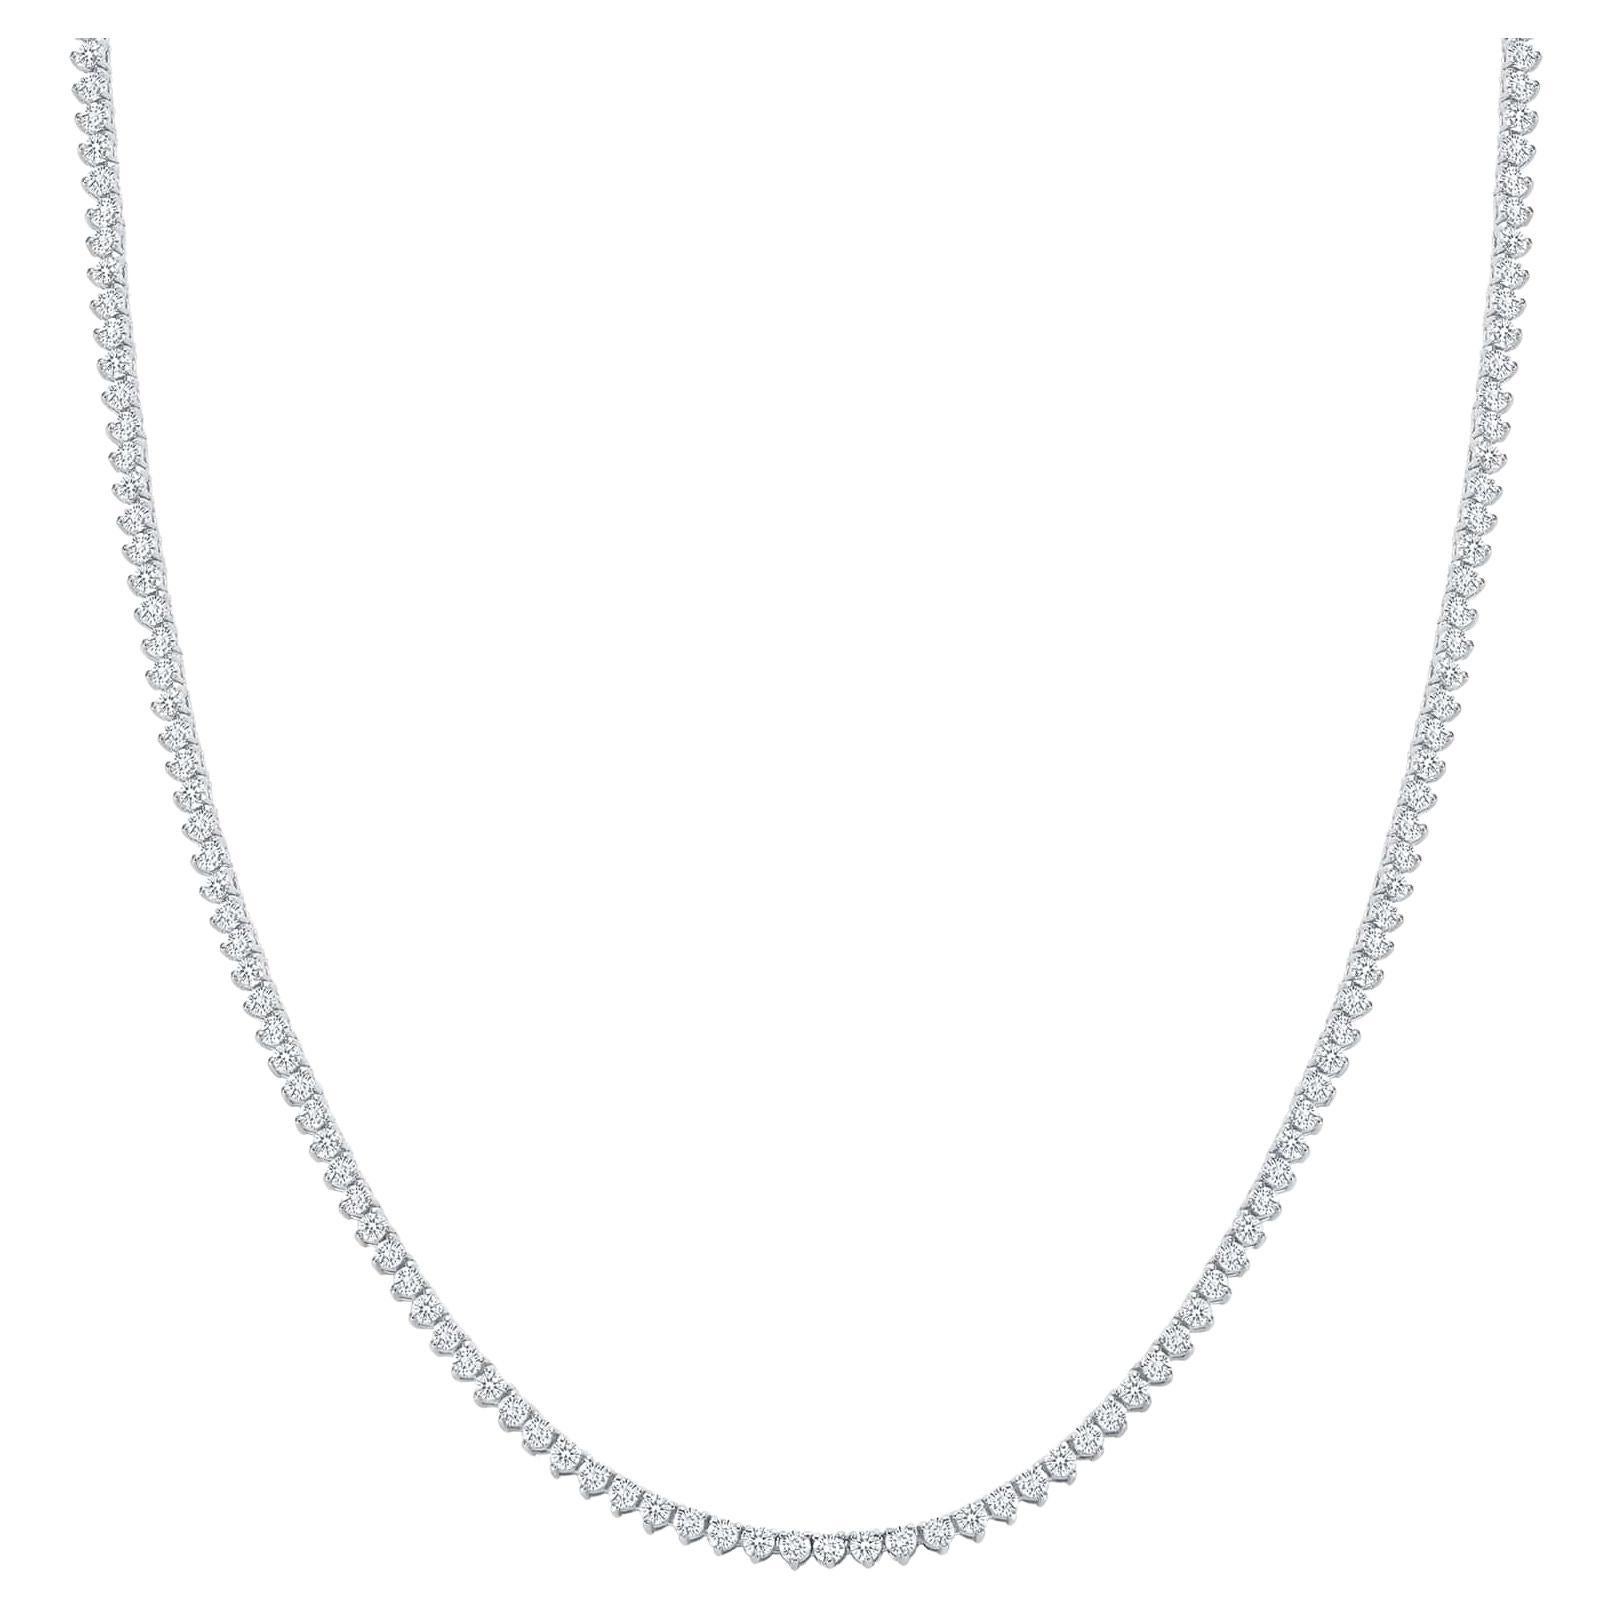 This diamond tennis necklace features beautifully cut natural earth mined round diamonds set gorgeously in 14k gold

Necklace Information
Metal : 14k Gold
Diamond Cut : Round Natural
Total Diamond Carats : 1 Carat
Diamond Clarity : VS
Diamond Color